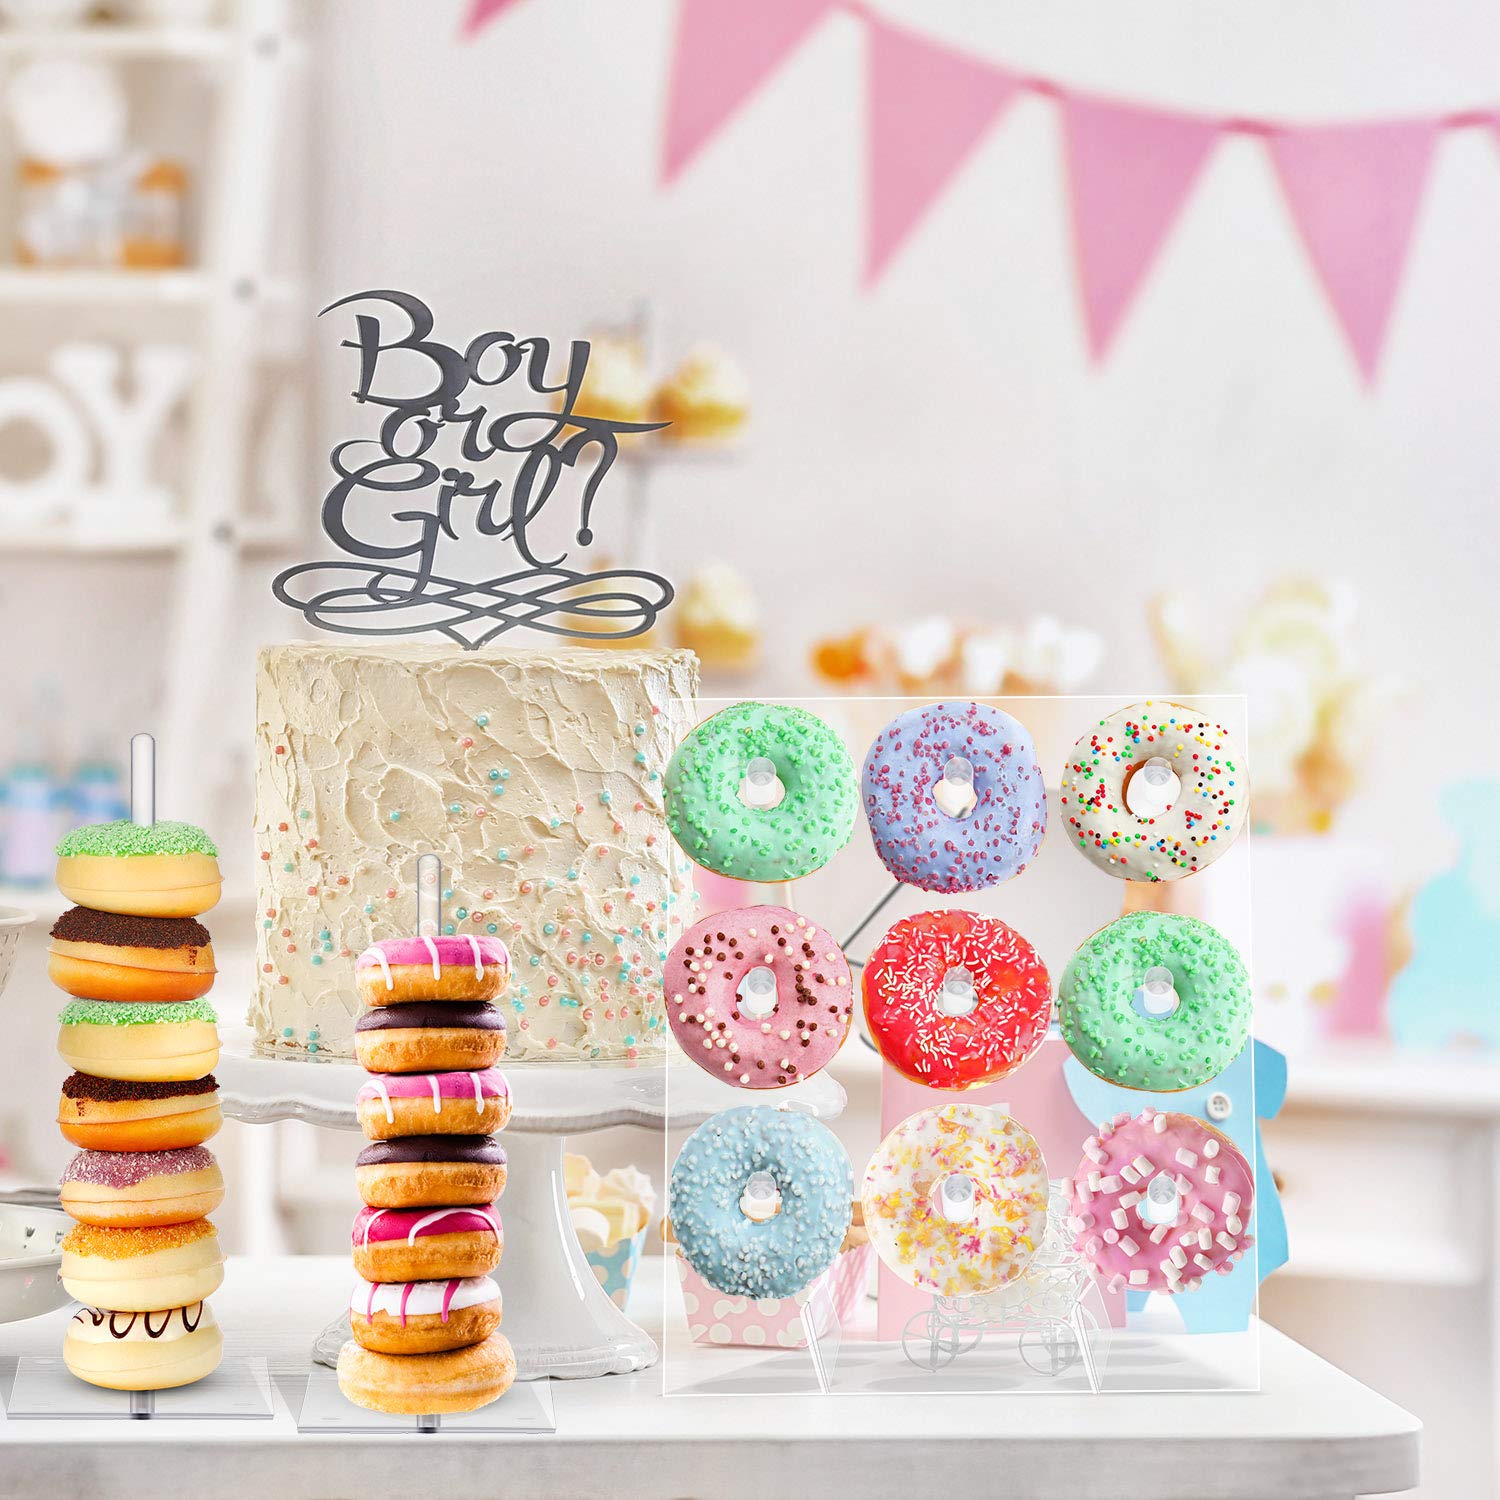 Frienda 1 Pack Acrylic Donut Display Wall Stand, Holds up to 18 Donuts and 2 Pieces Acrylic Donut Stands Clear Bagels Holder Square Stand Holder for Dessert Table Wedding Birthday Party